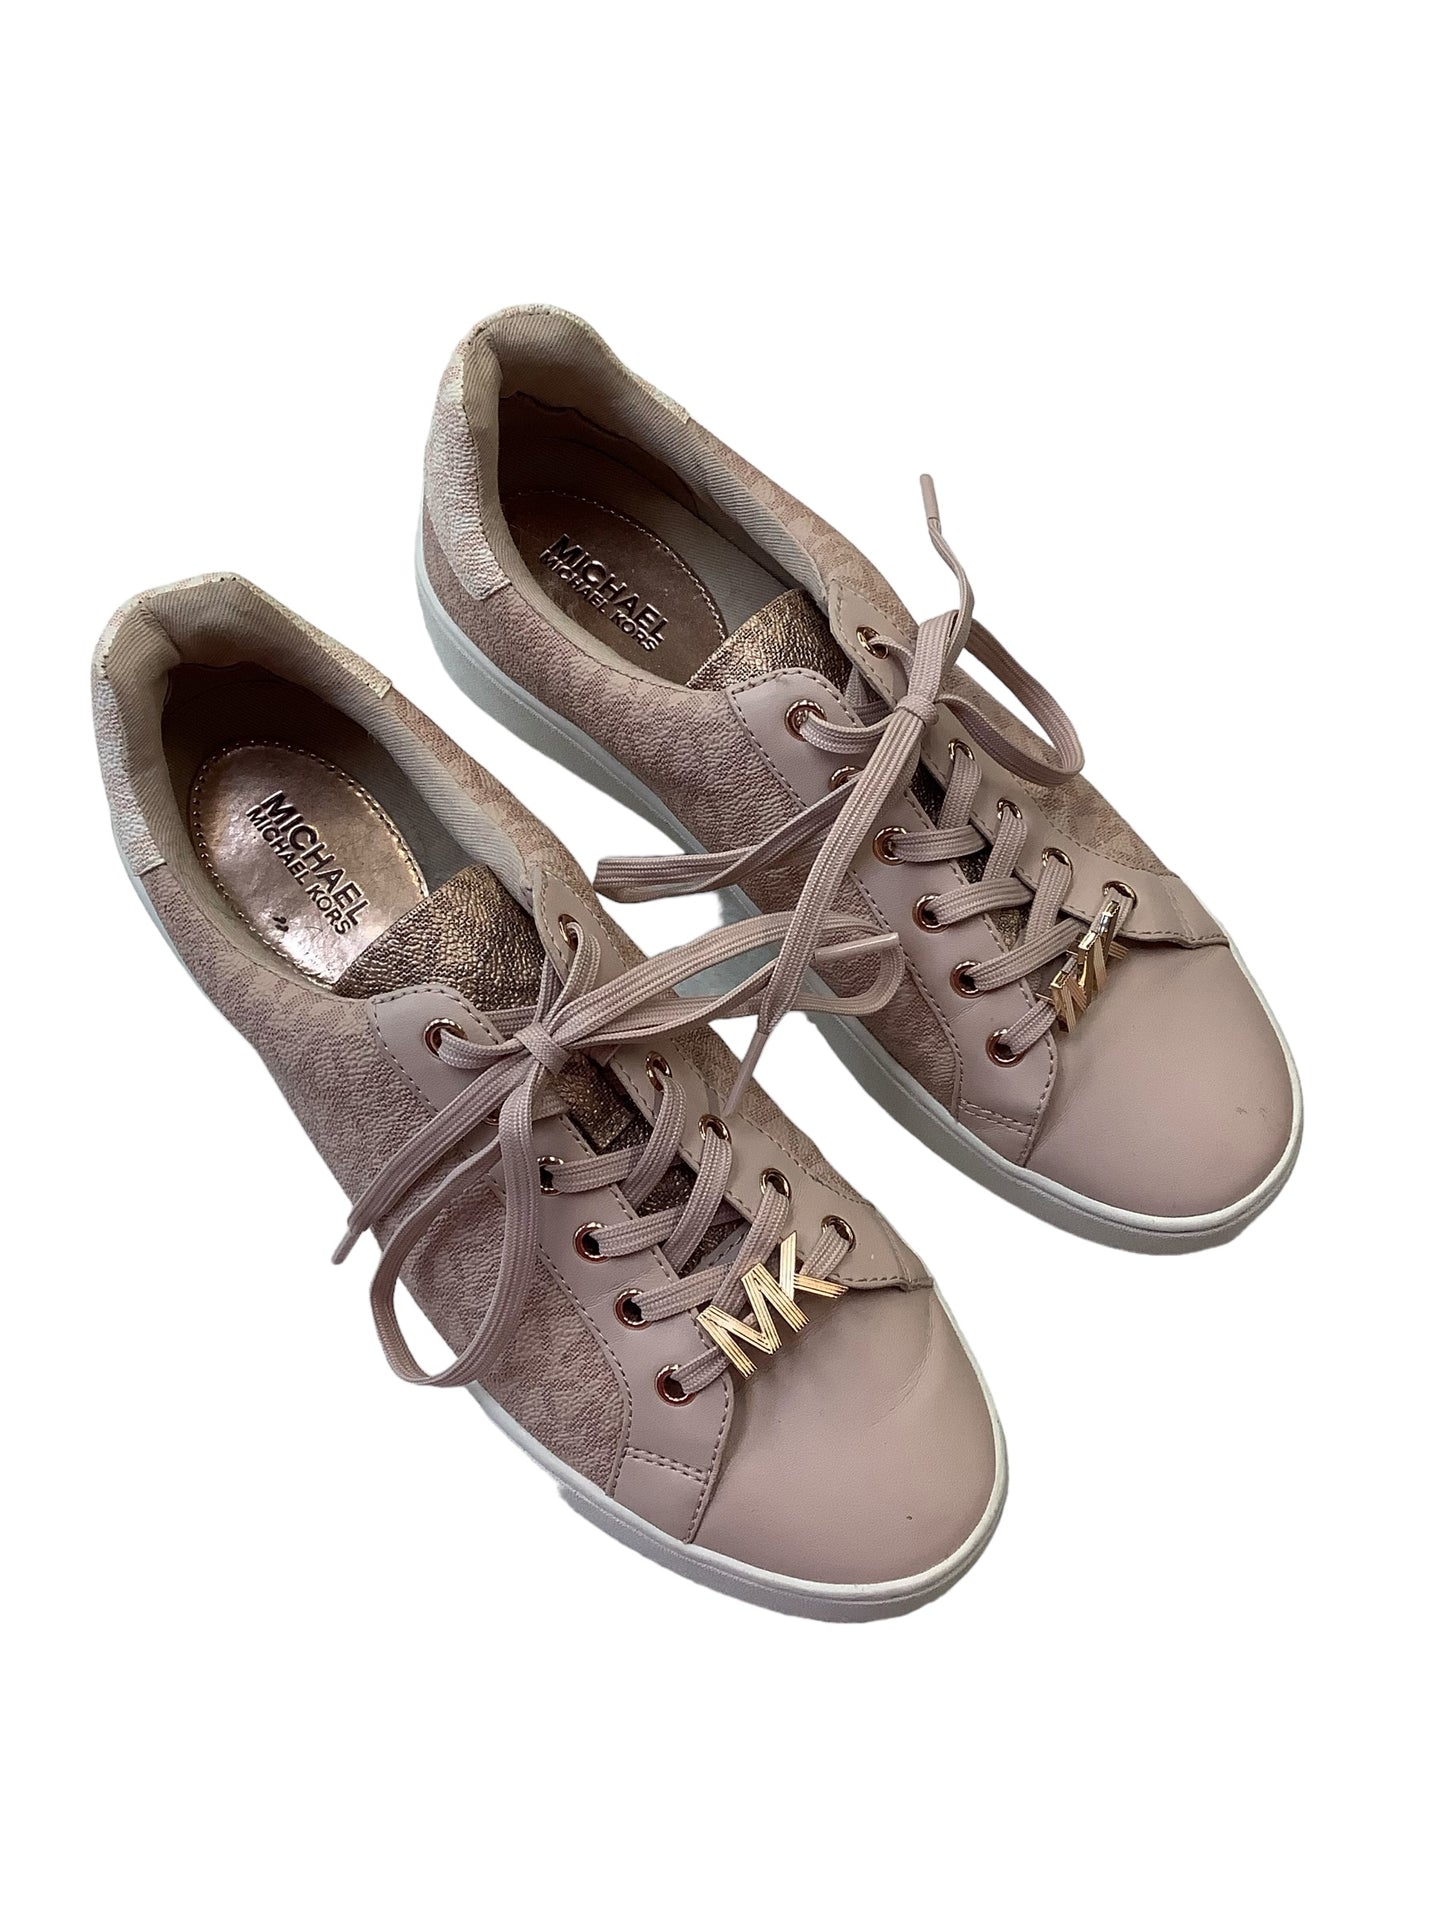 Shoes Athletic By Michael Kors  Size: 9